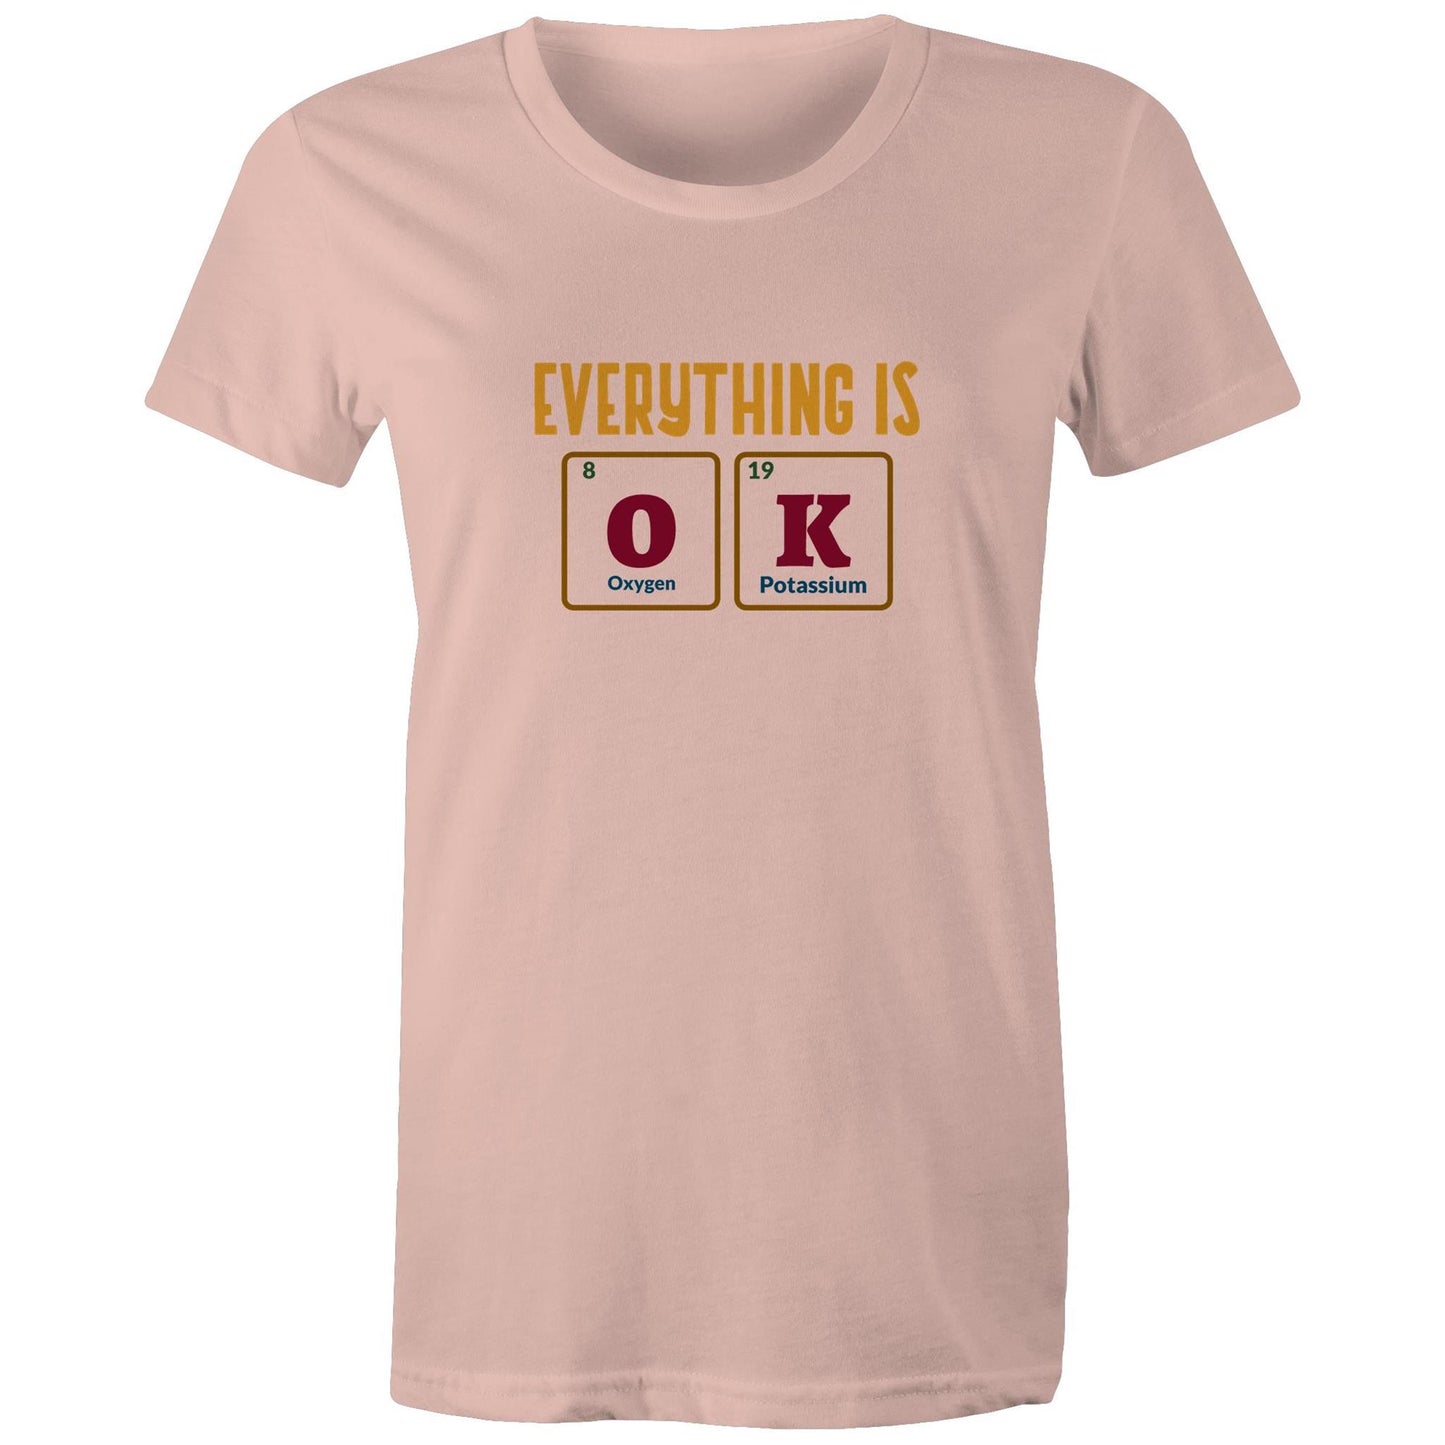 Everything Is OK, Periodic Table Of Elements - Womens T-shirt Pale Pink Womens T-shirt Science